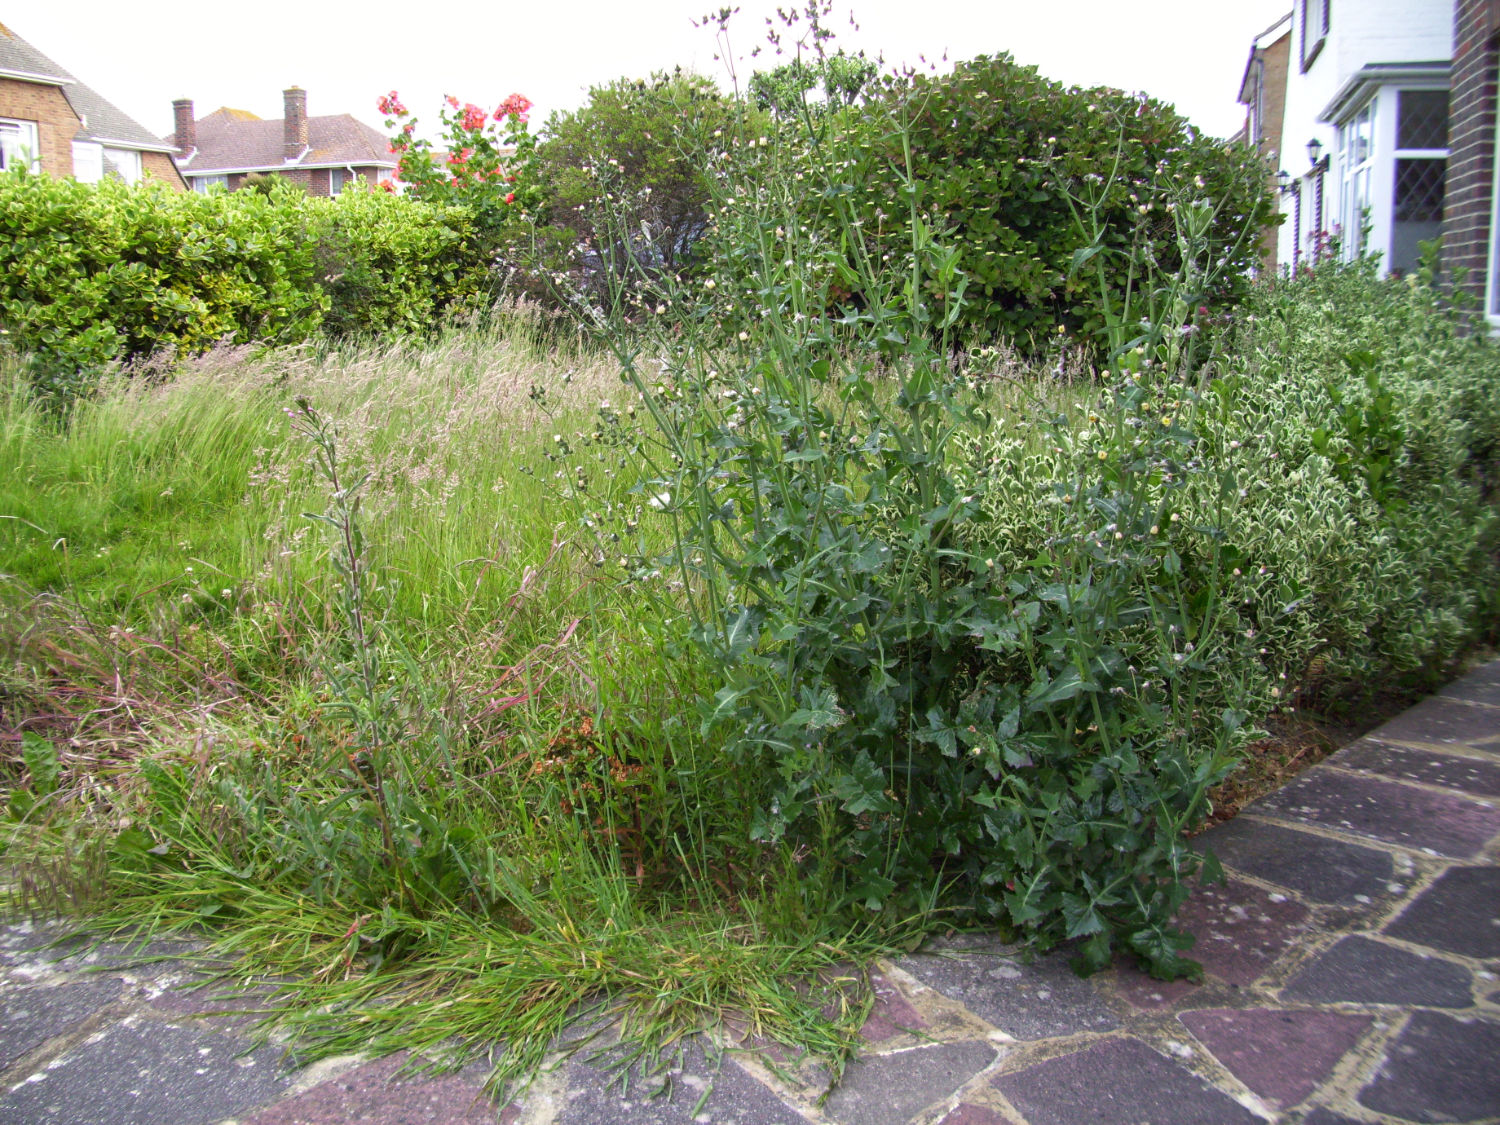 Wildly overgrown garden with tall grass and weeds